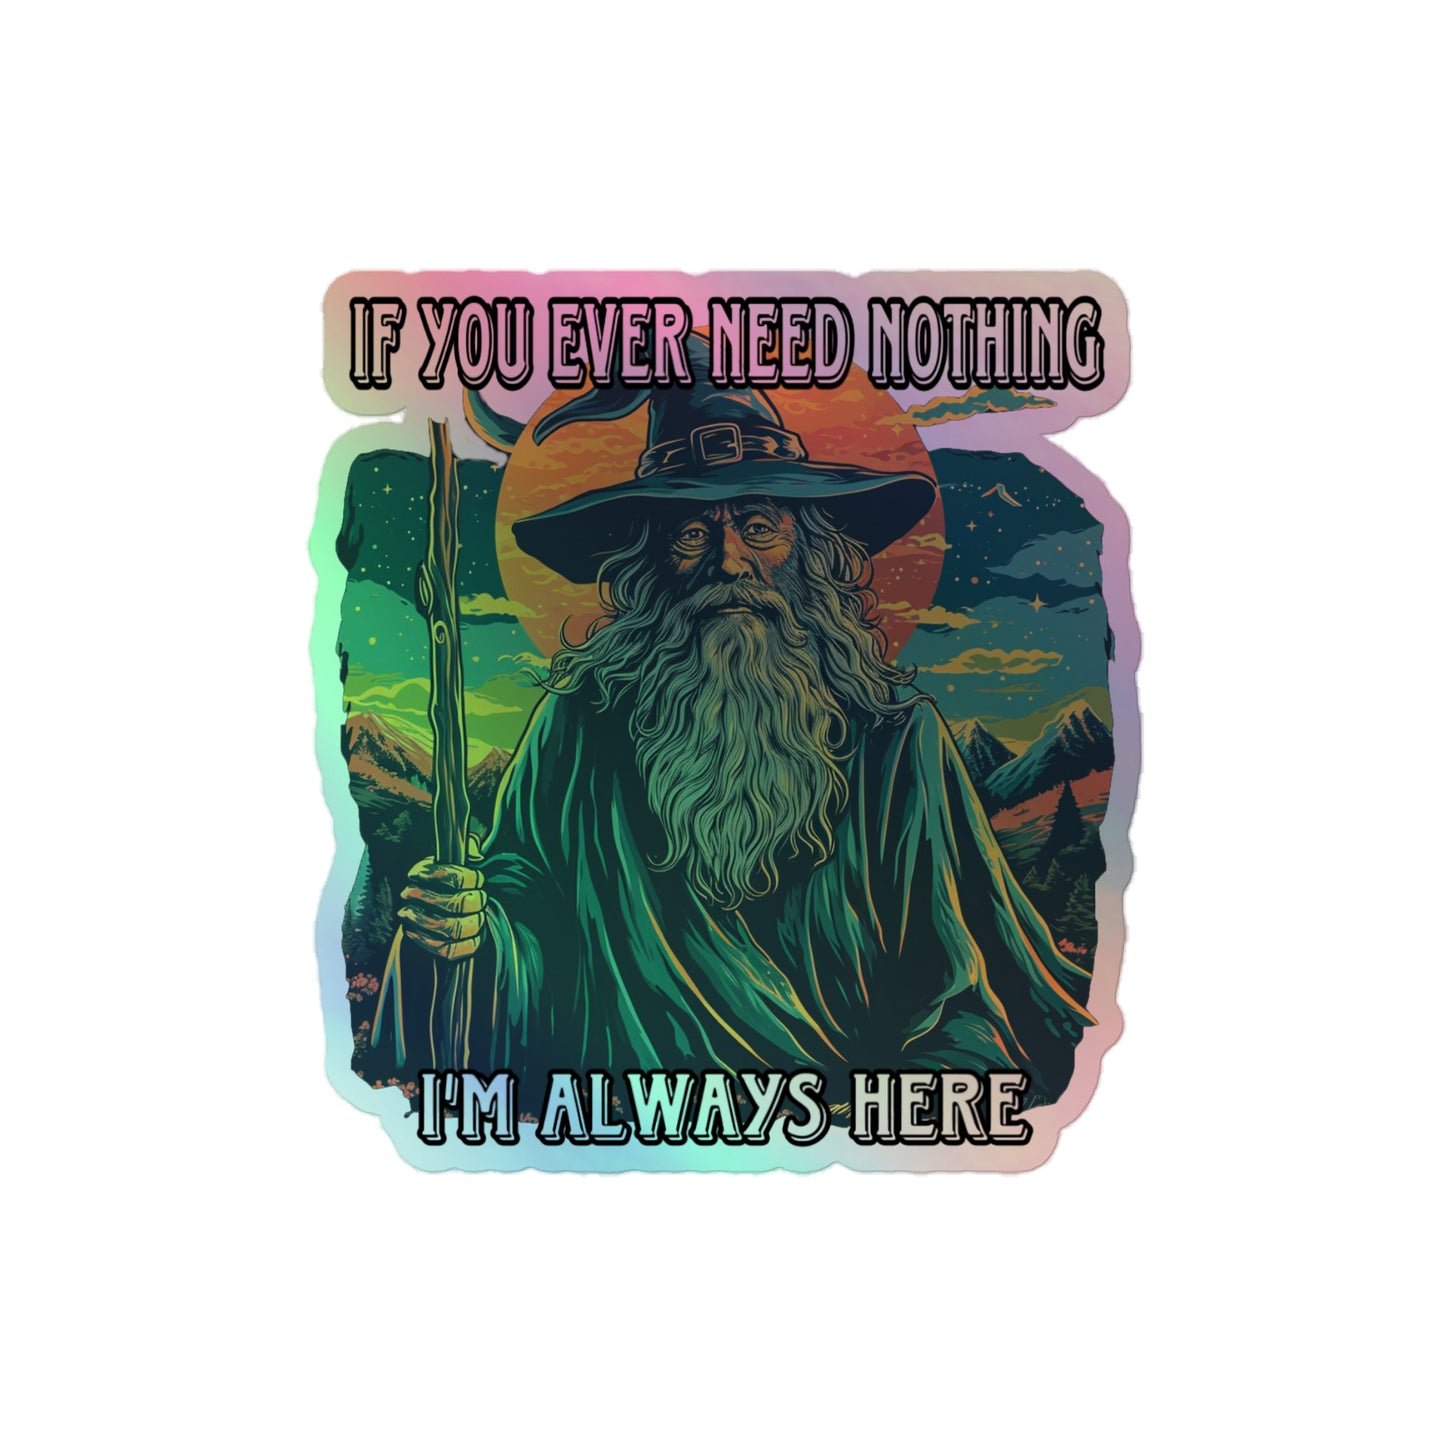 If you ever need nothing I’m always here Holographic sticker